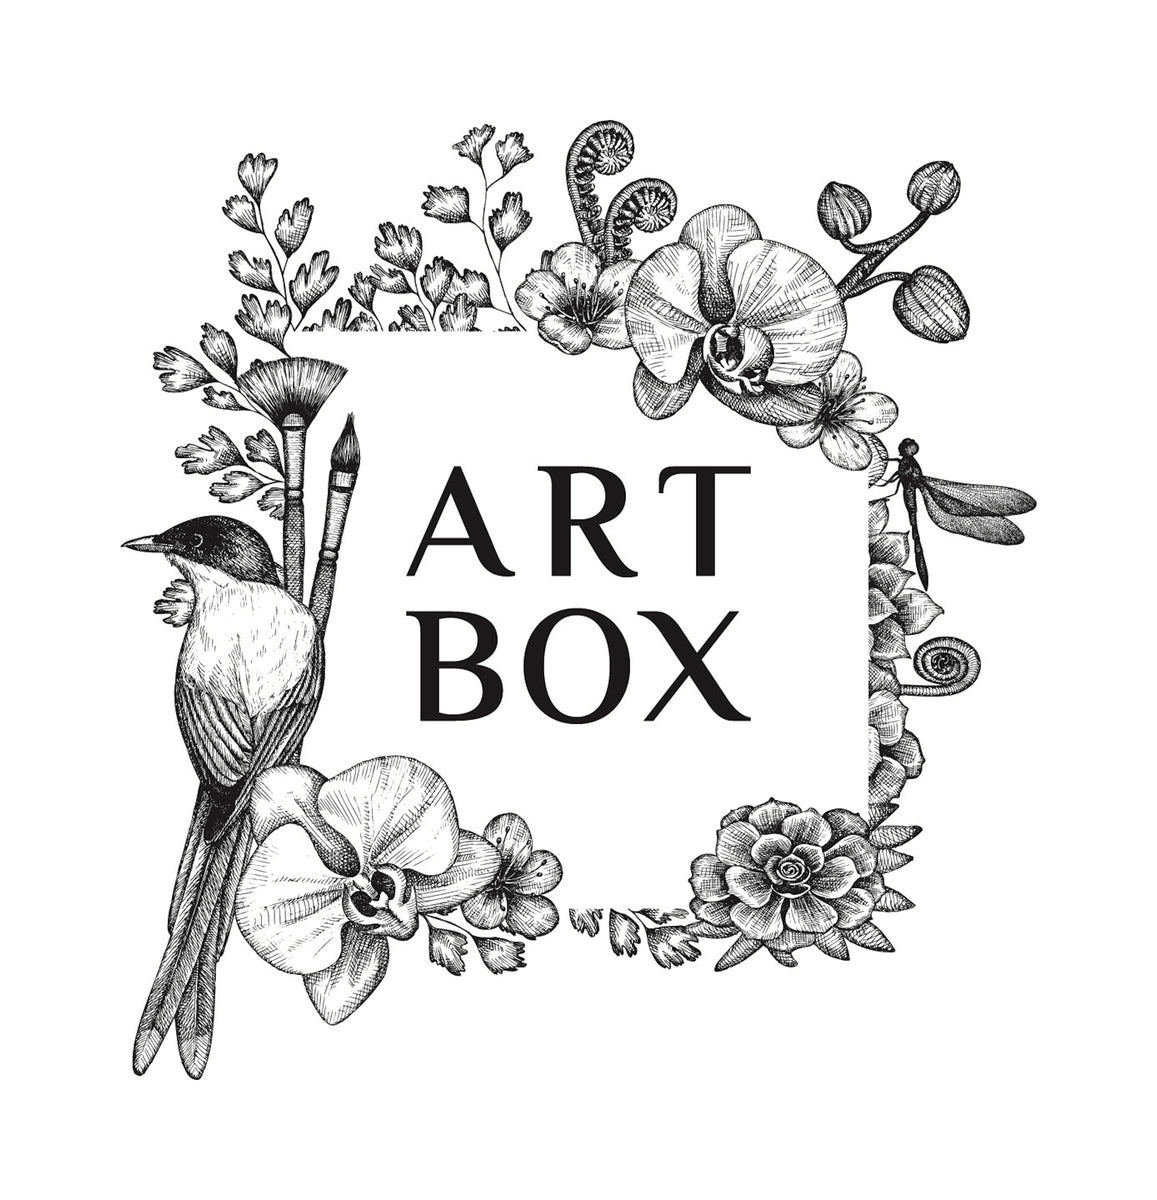 Solid Wood ArtBox with Gift Box